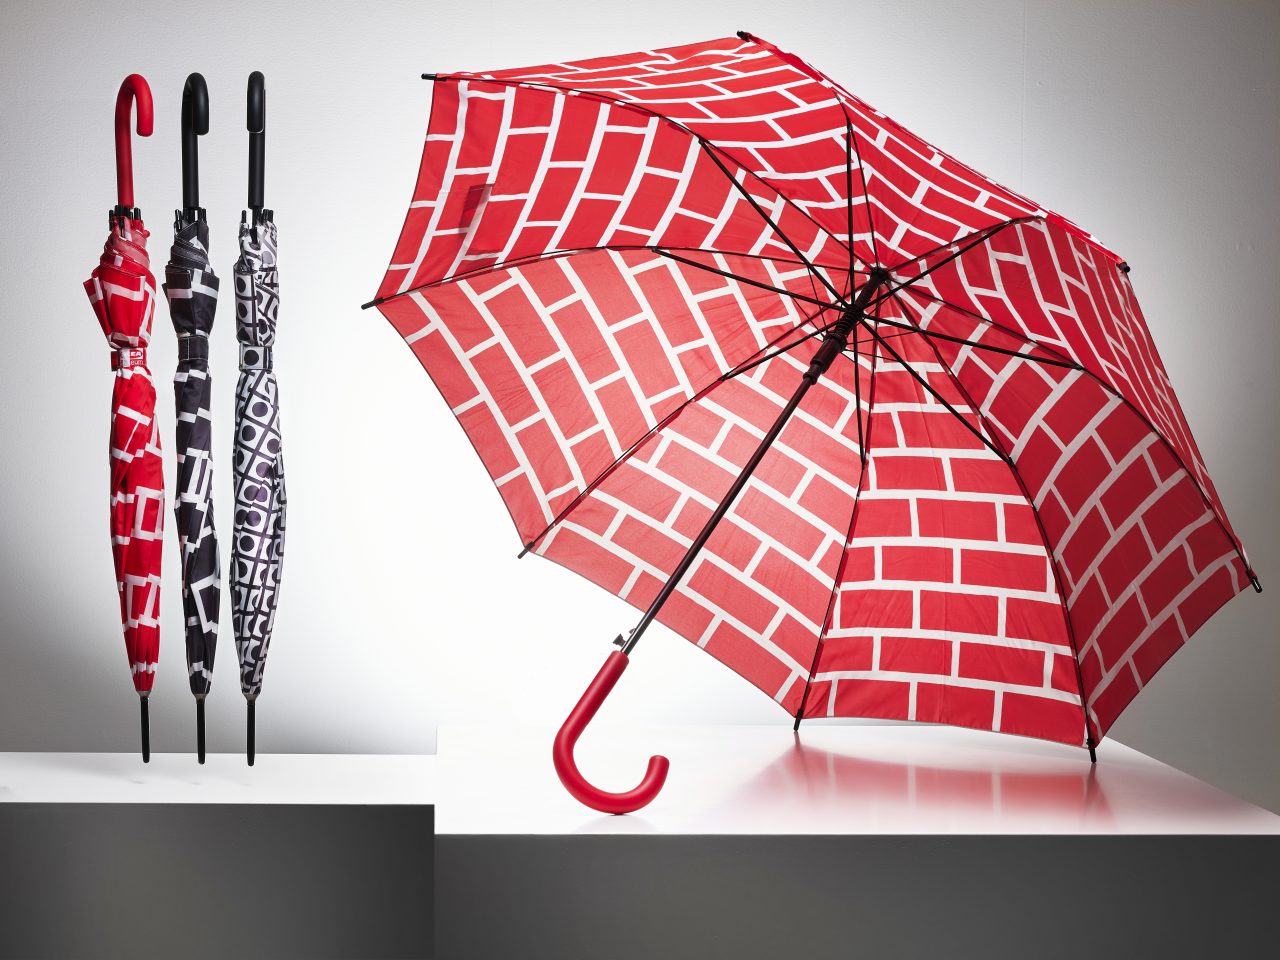 Umbrellas in different graphic patterns in red/white, black/white or grey/white.